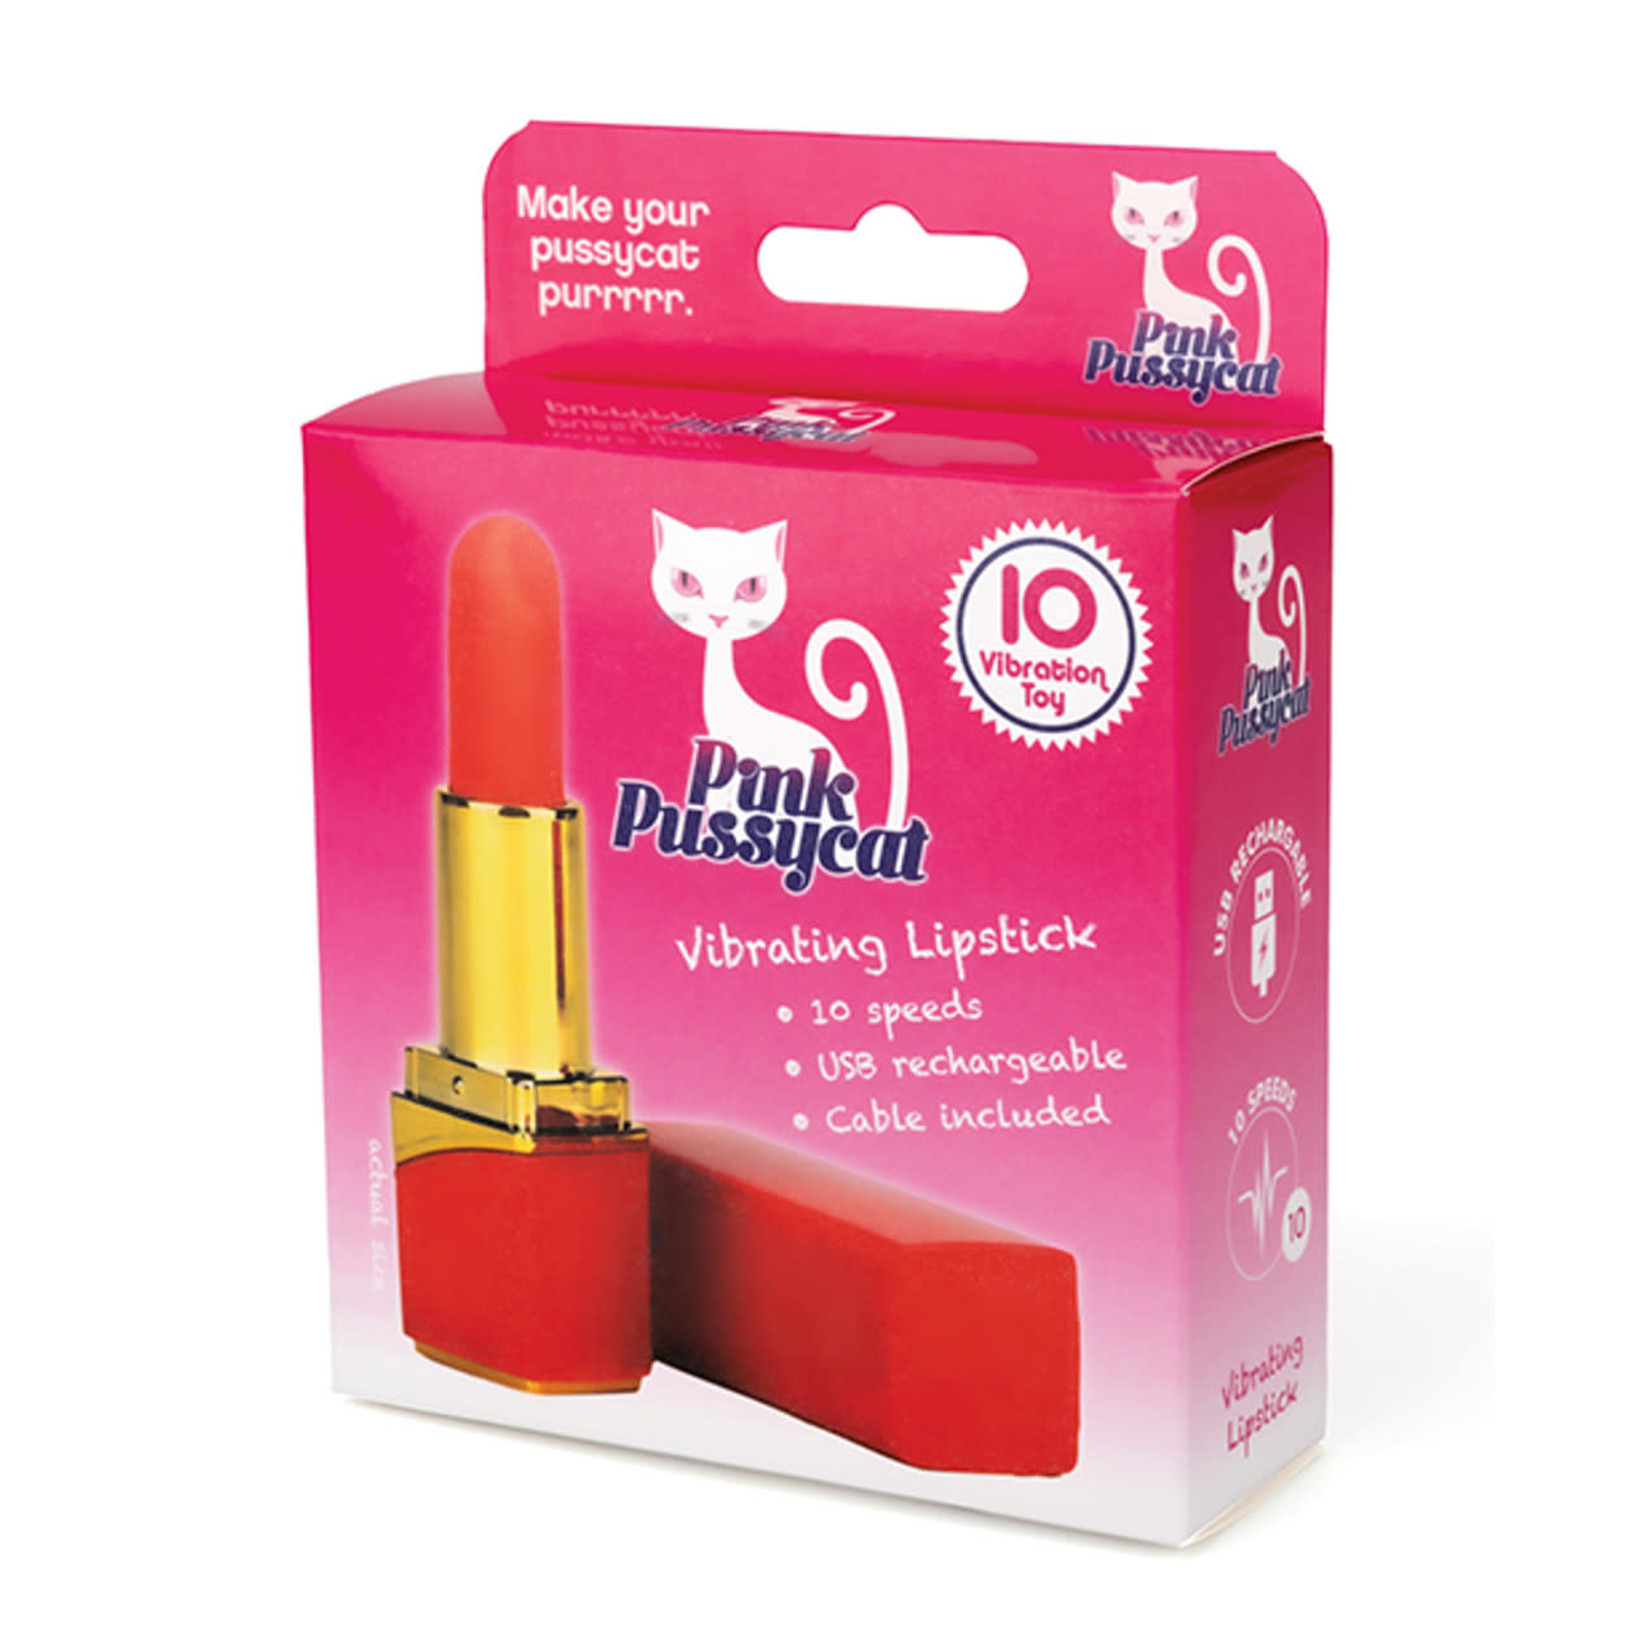 PINK PUSSYCAT PINK PUSSYCAT RECHARGEABLE LIPSTICK VIBE